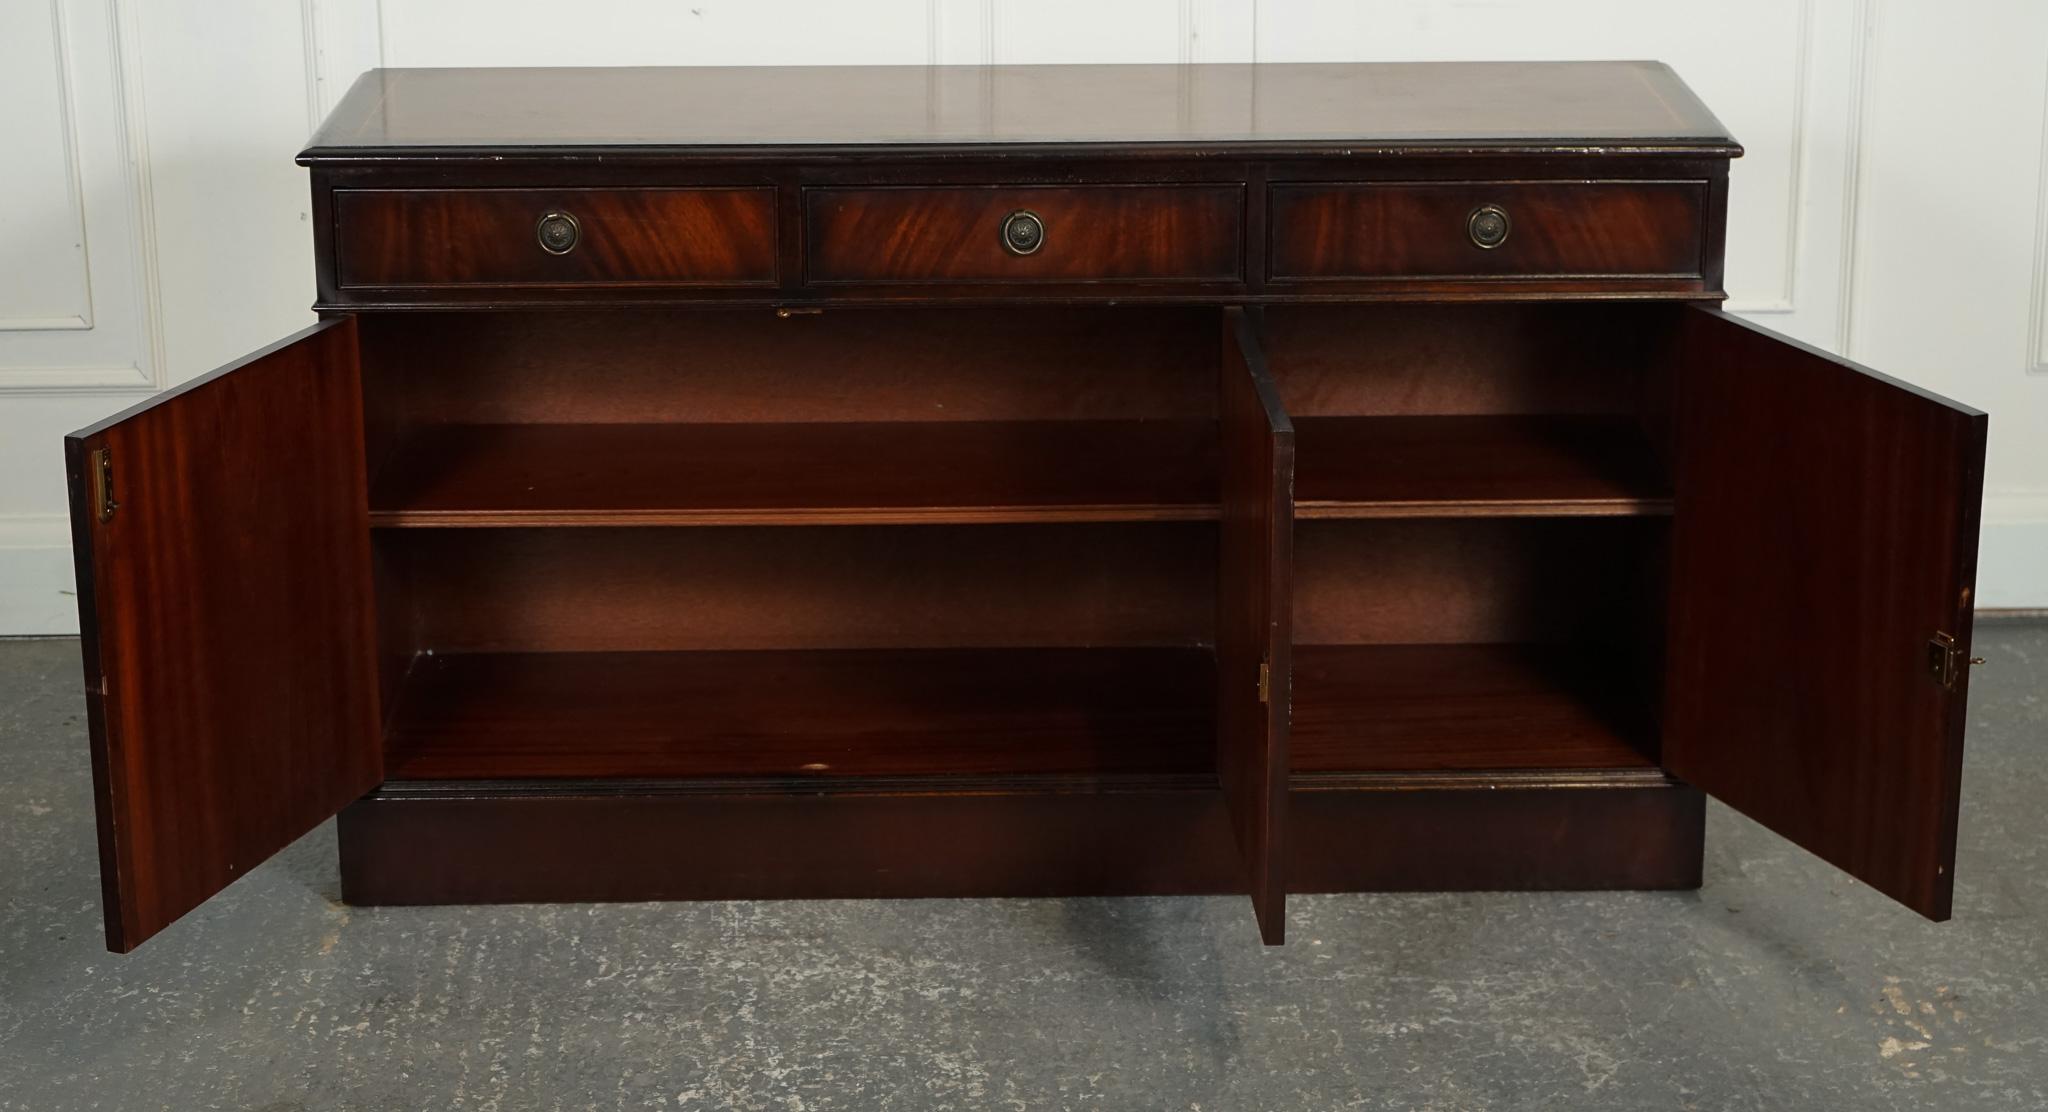 Hand-Crafted LOVELY FLAMED HARDWOOD GEORGIAN STYLE BUFFET SiDEBOARD 